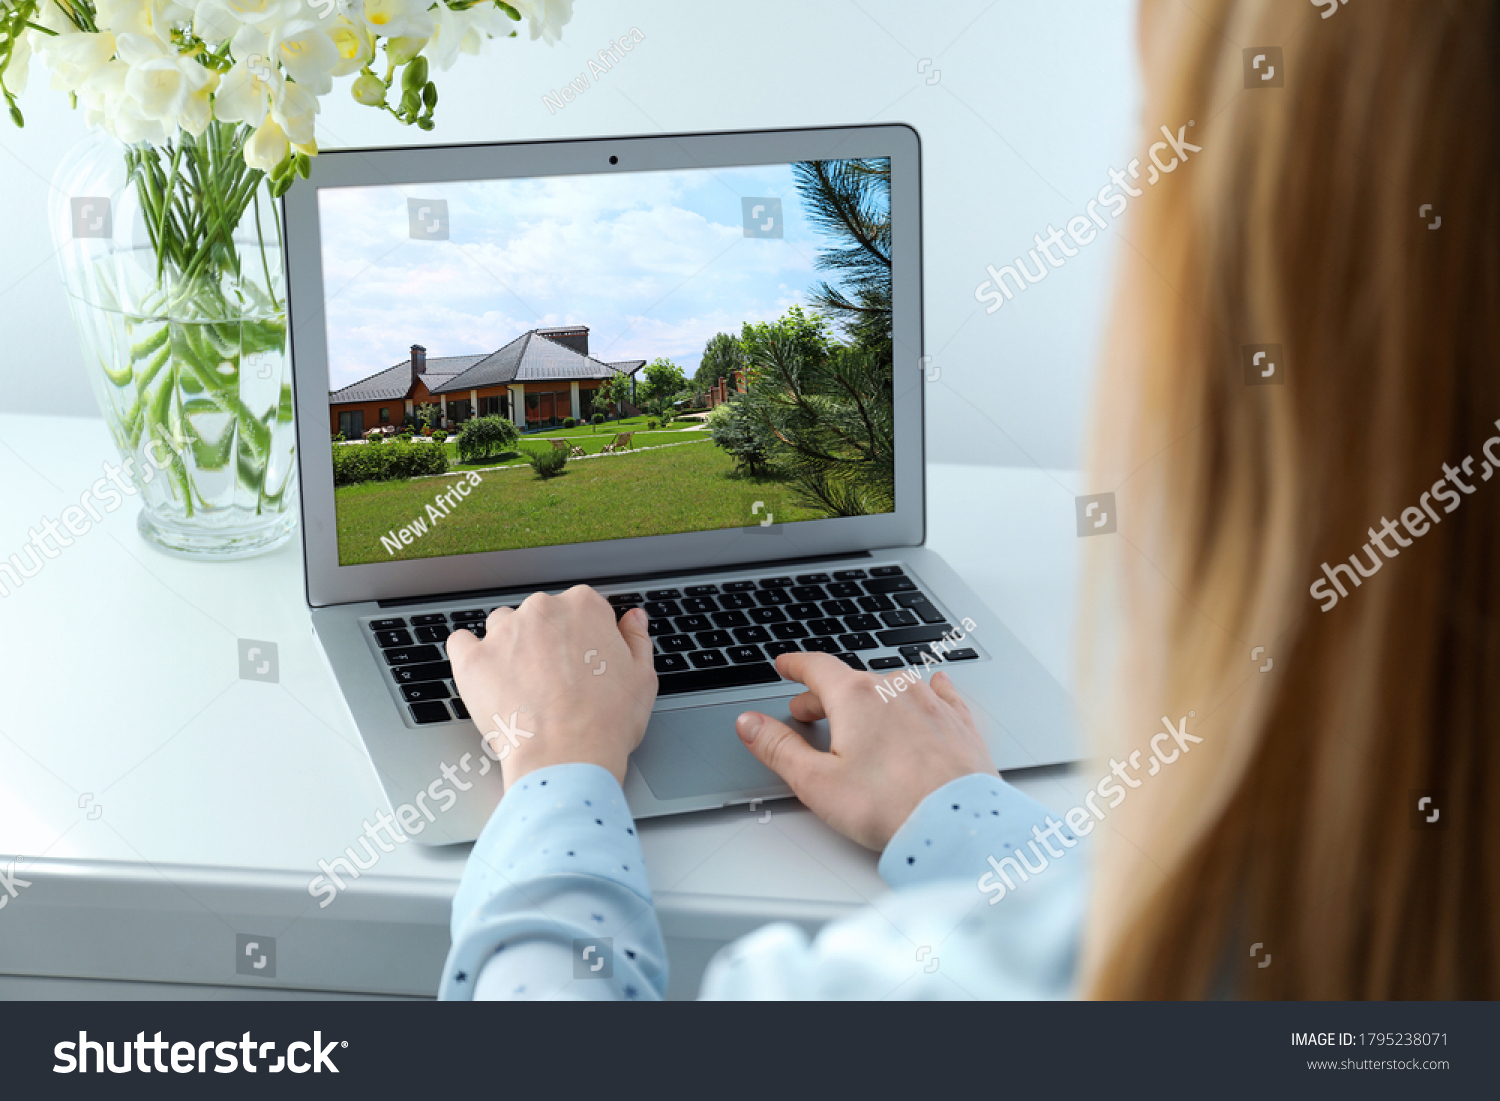 Woman choosing new house online using laptop or real estate agent working at table, closeup #1795238071